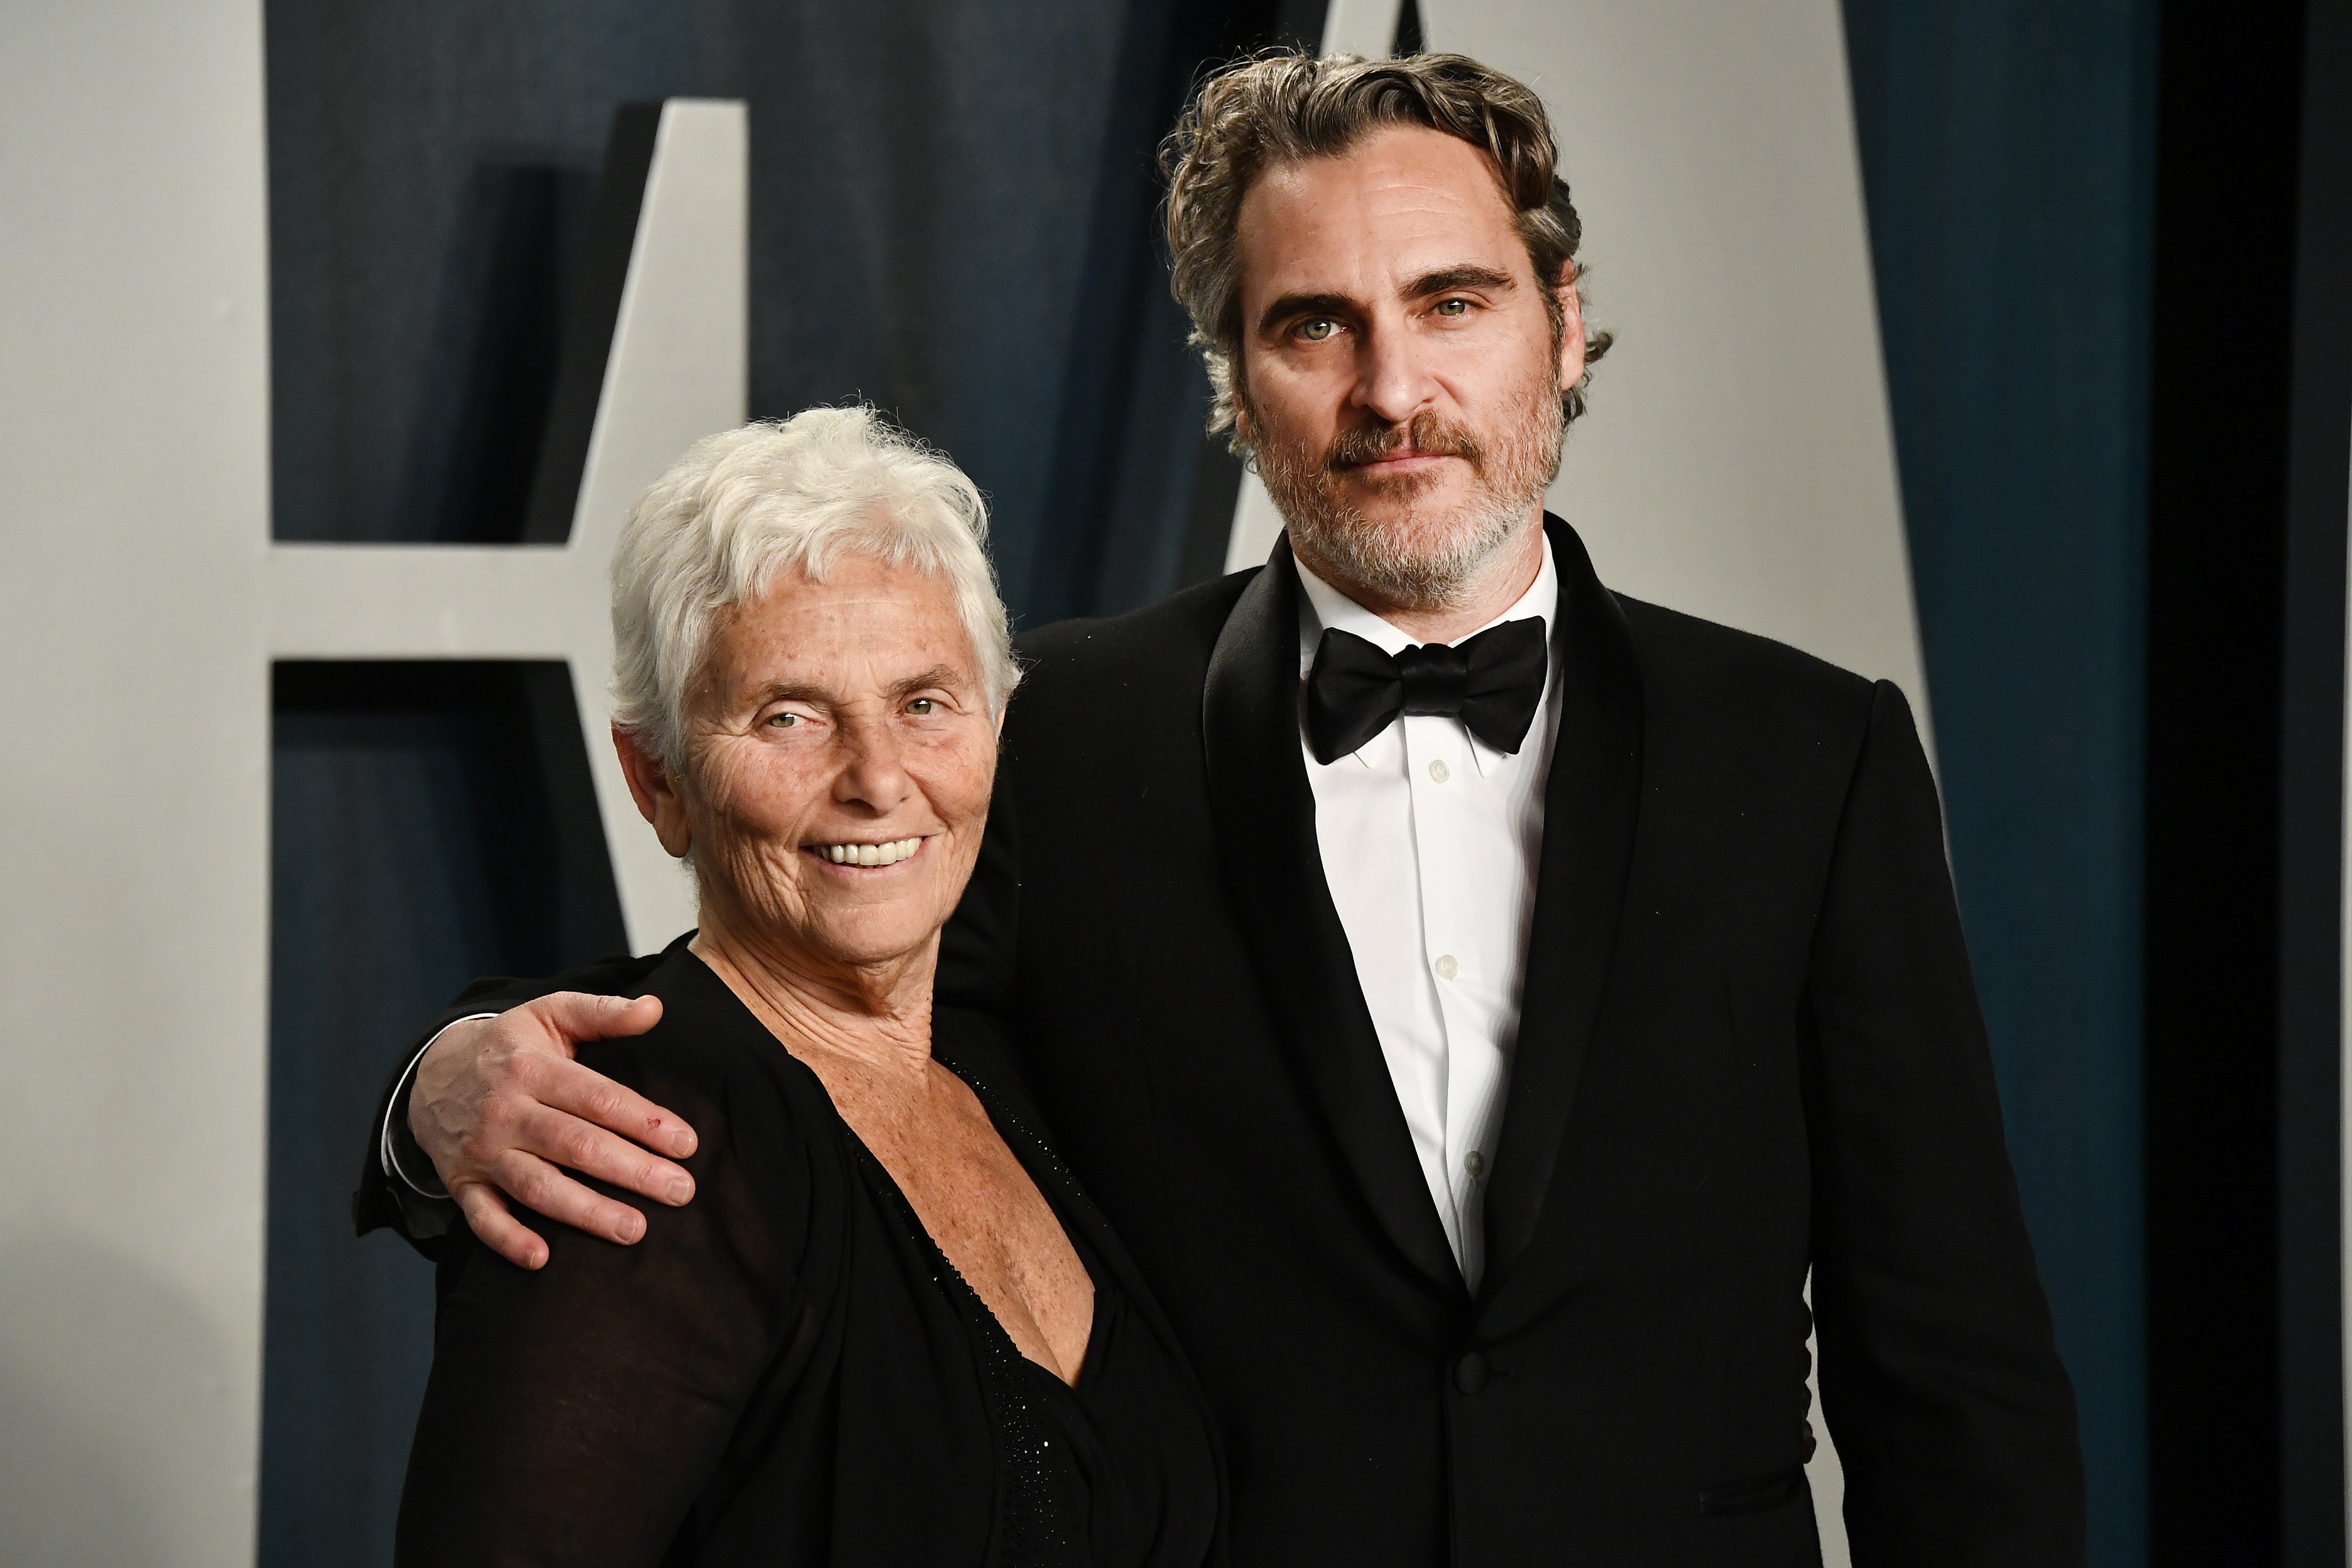 Joaquin Phoenix and Arlyn Phoenix at the 2020 Vanity Fair Oscar Party at Wallis Annenberg Center for the Performing Arts on February 09, 2020 in Beverly Hills, California.| Source: Getty Images